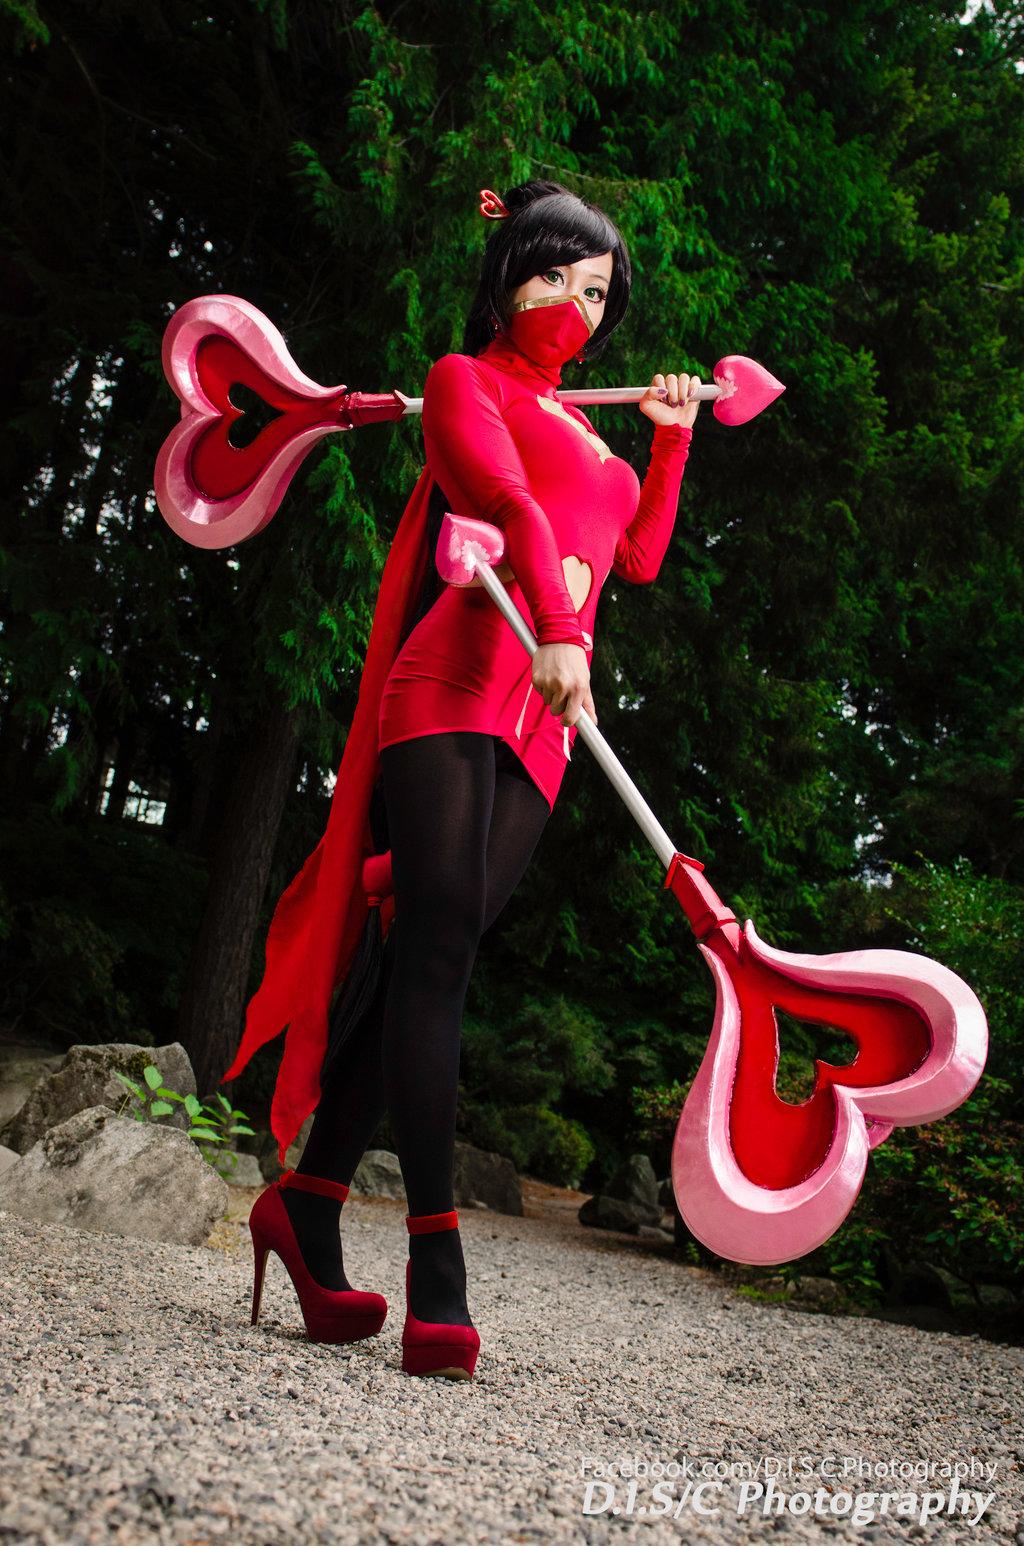 49 Hot Pictures Of Heartseeker Vayne From League Of Legends Will Get You Hot Under Your Collars | Best Of Comic Books